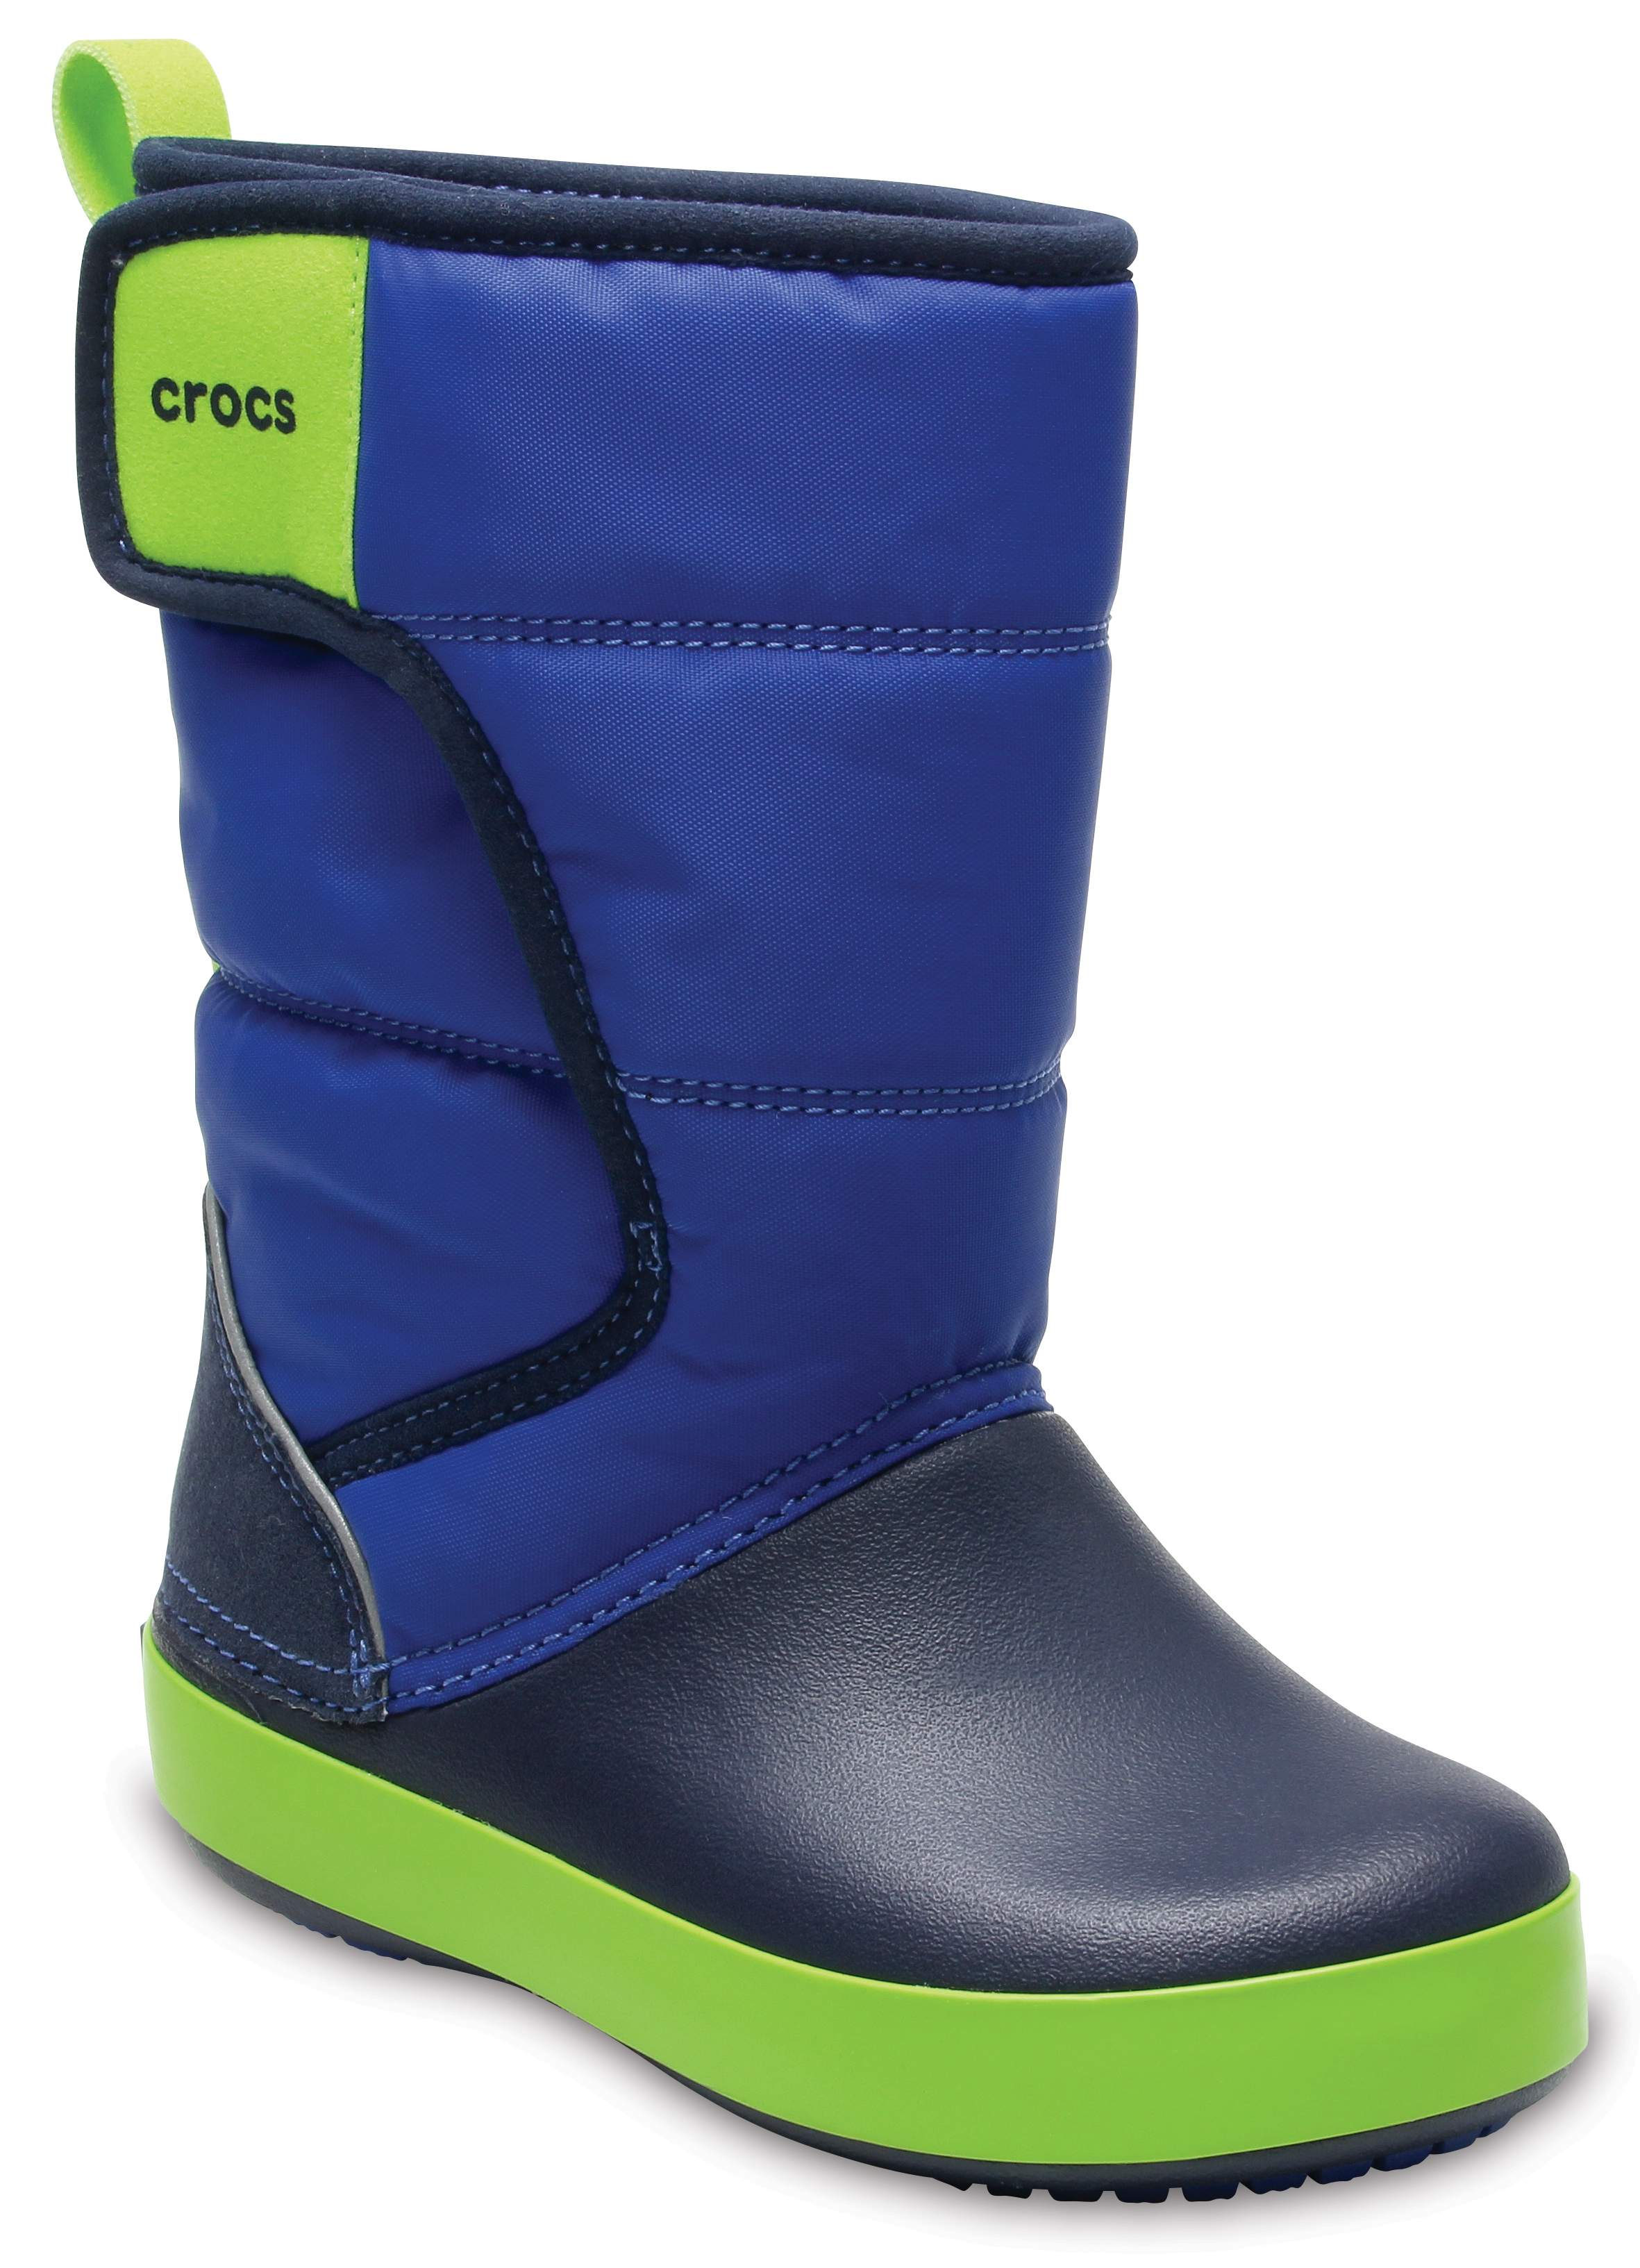 crocs lodgepoint snow boot